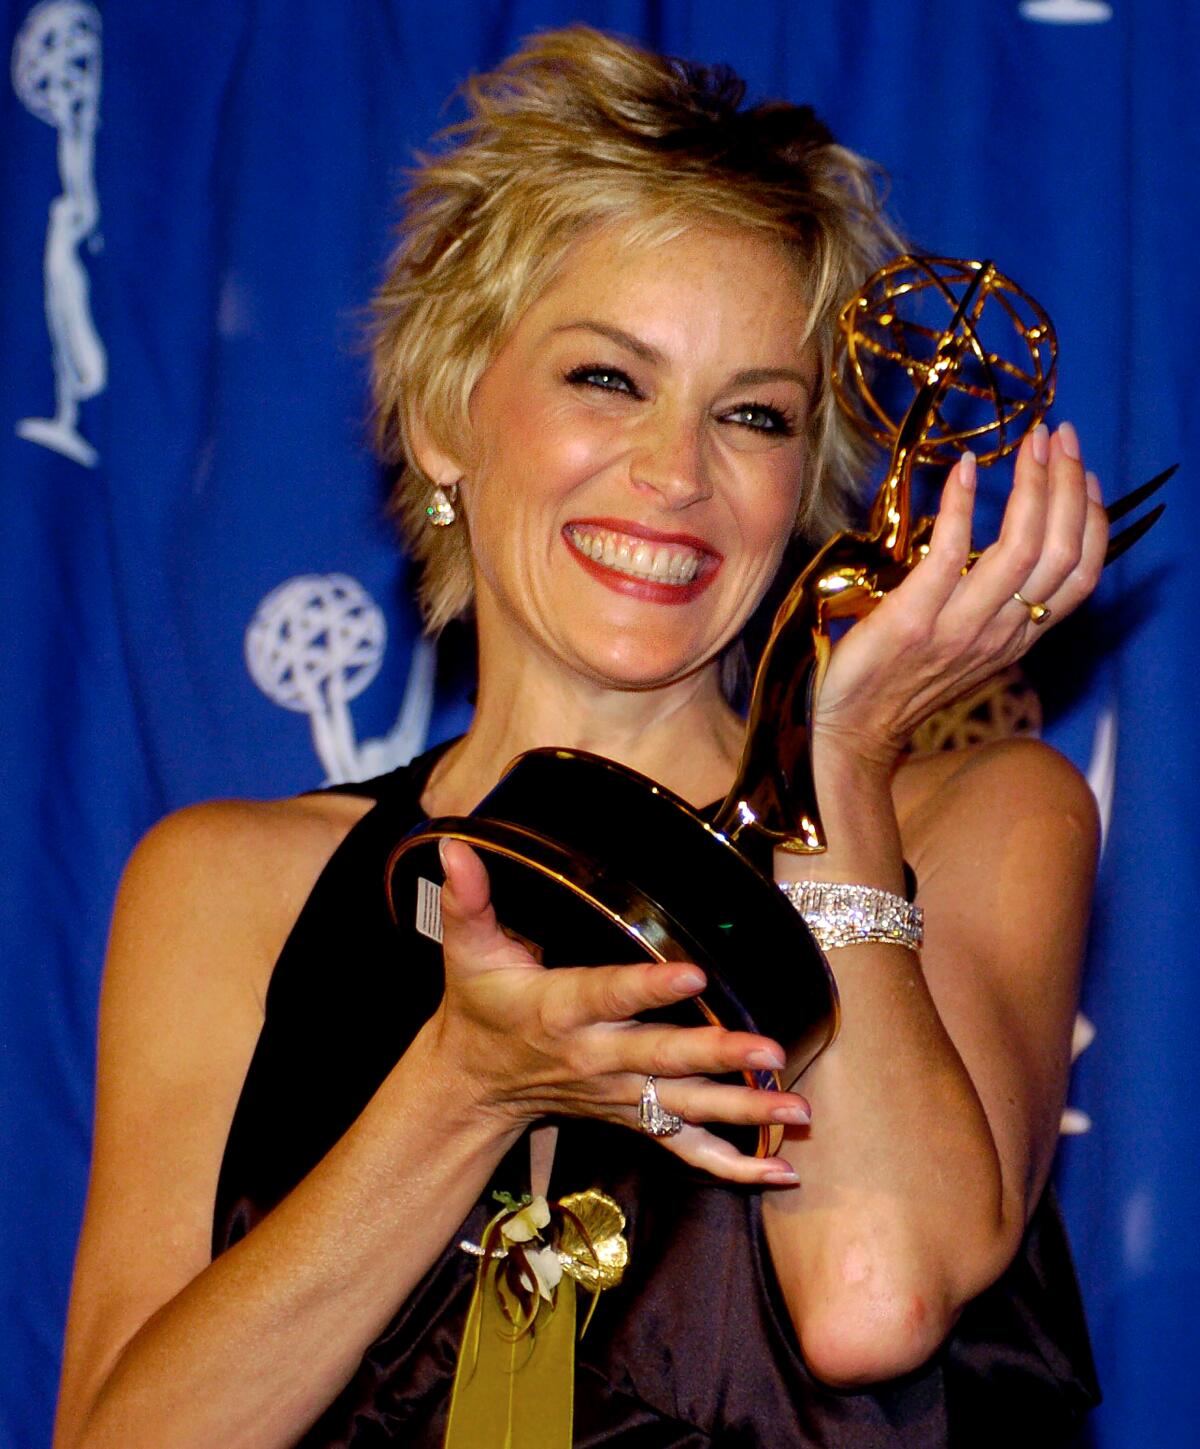 Actress Sharon Stone smiles broadly as she holds up an Emmy statuette